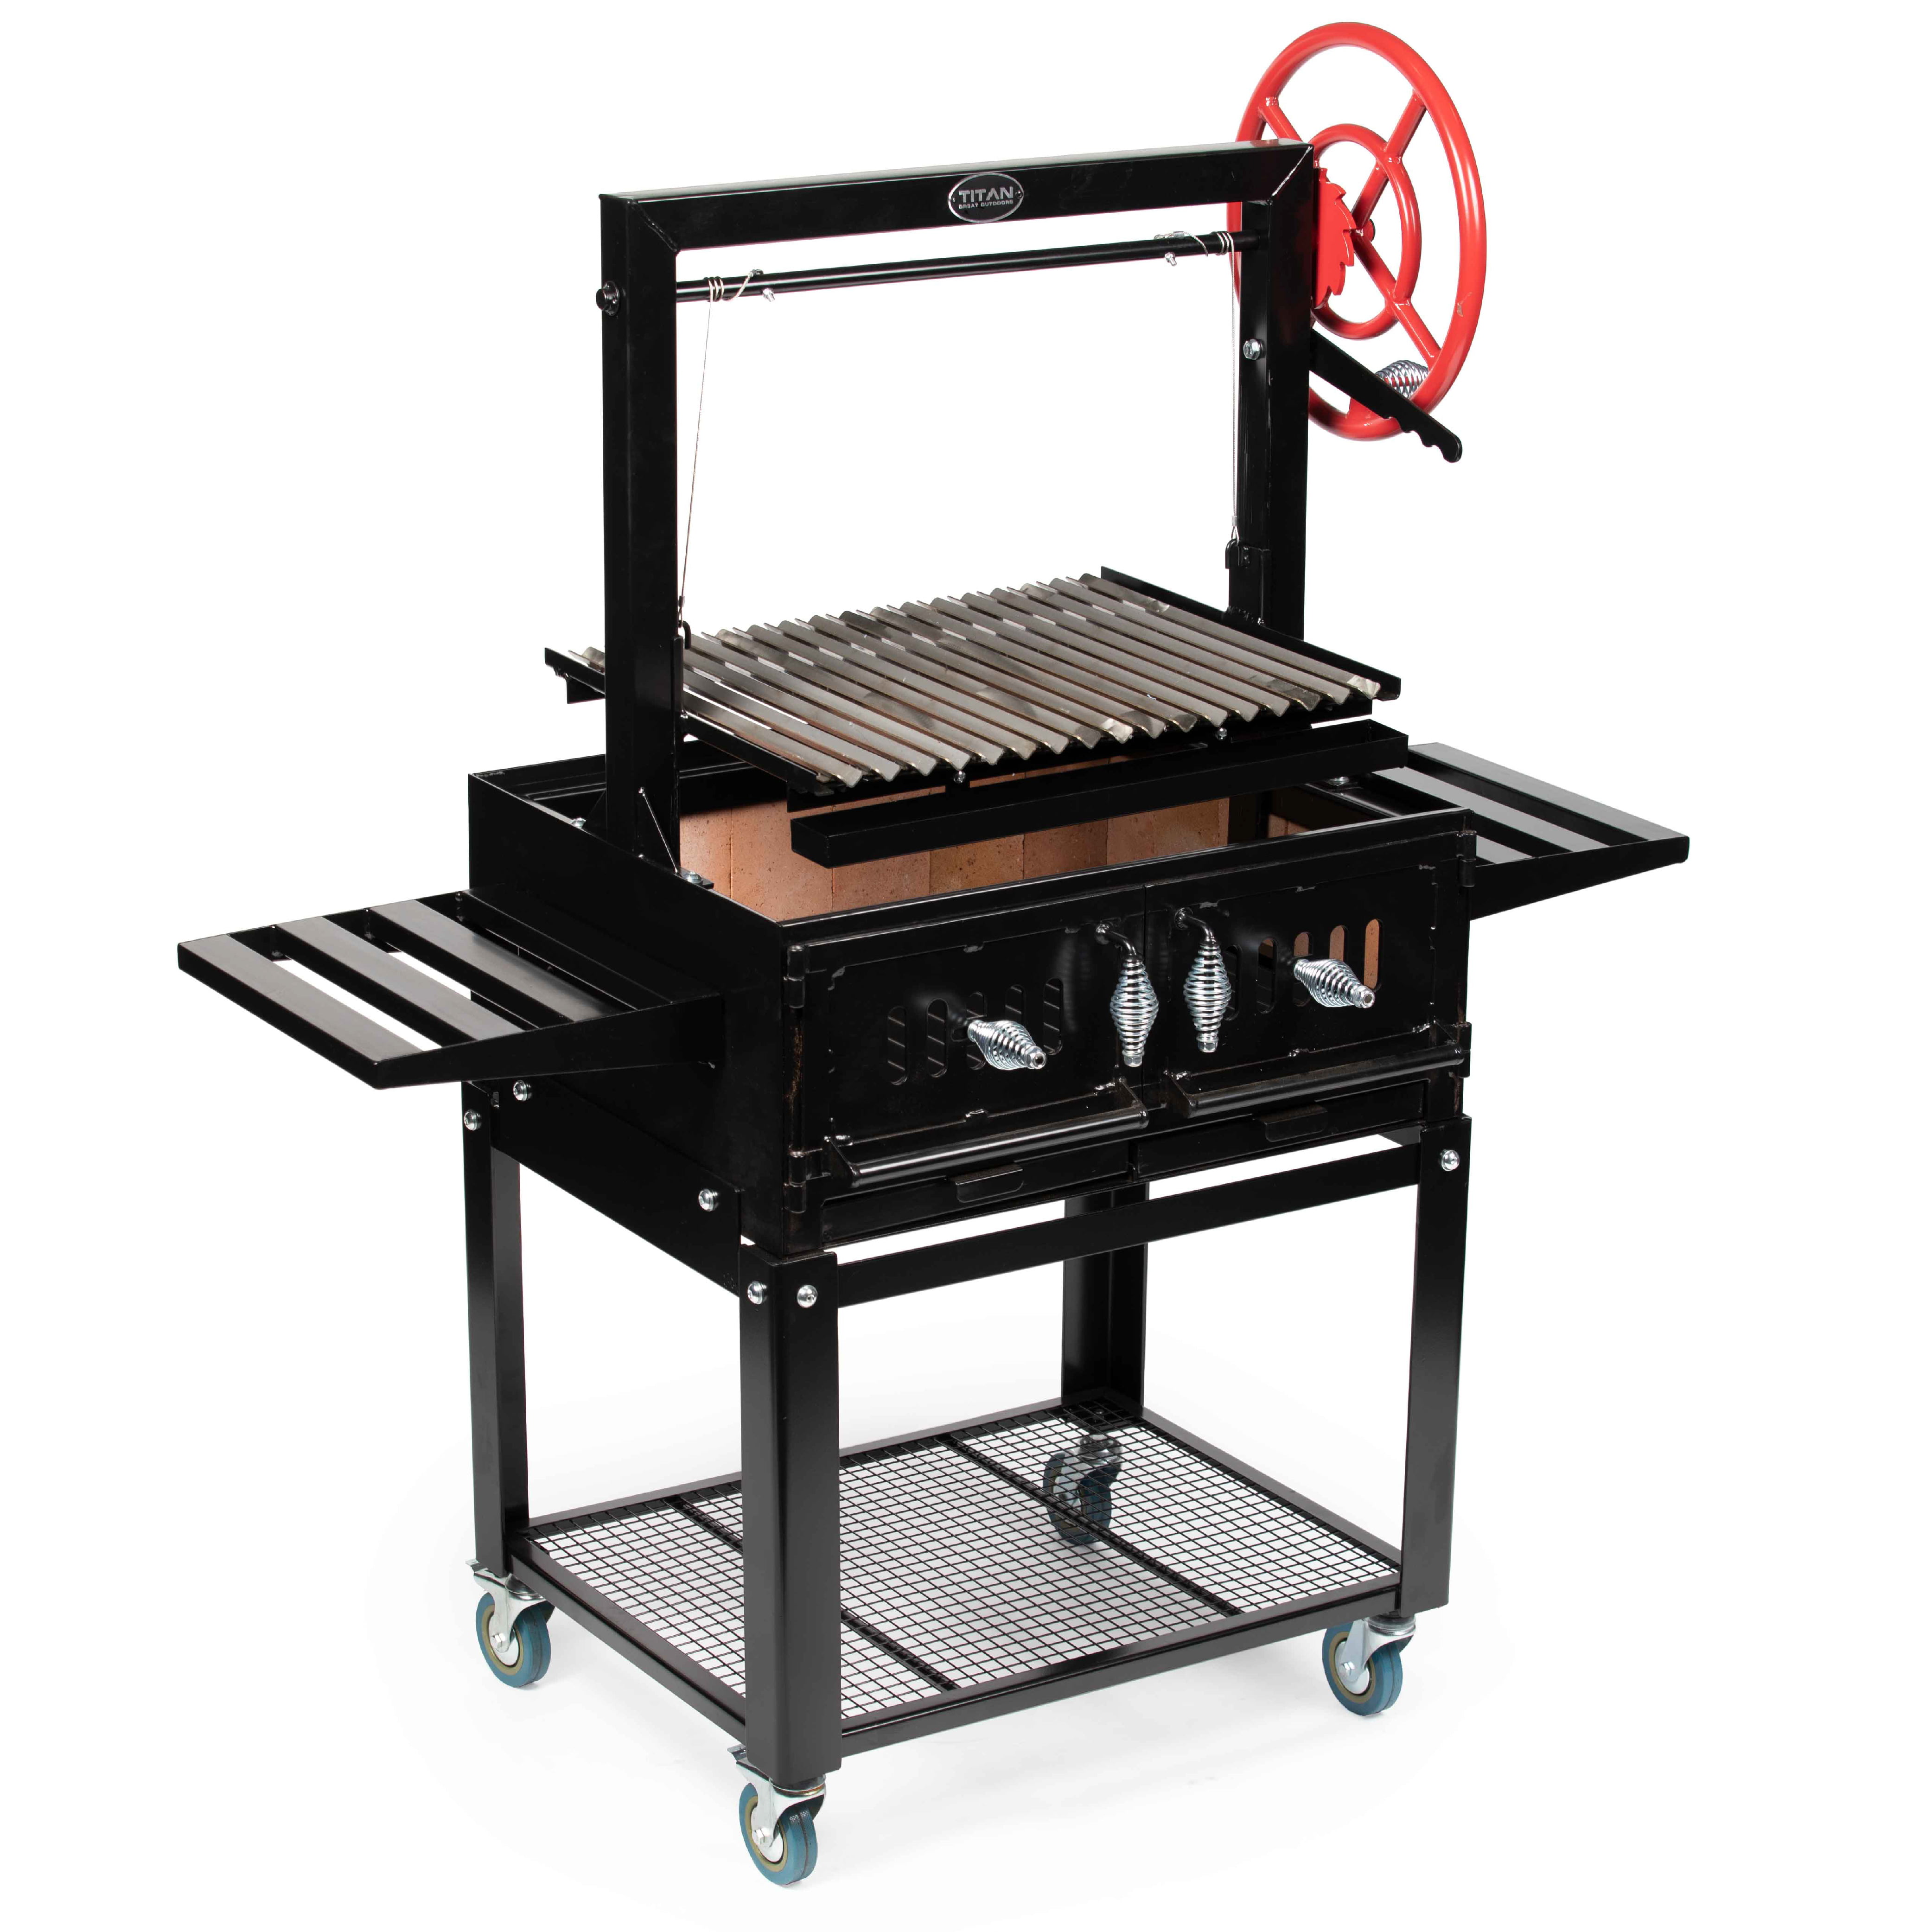 Titane Barbecue à charbon Grill Barbecue Grill Durable Filet Plaque Camping tablew M6Z2 